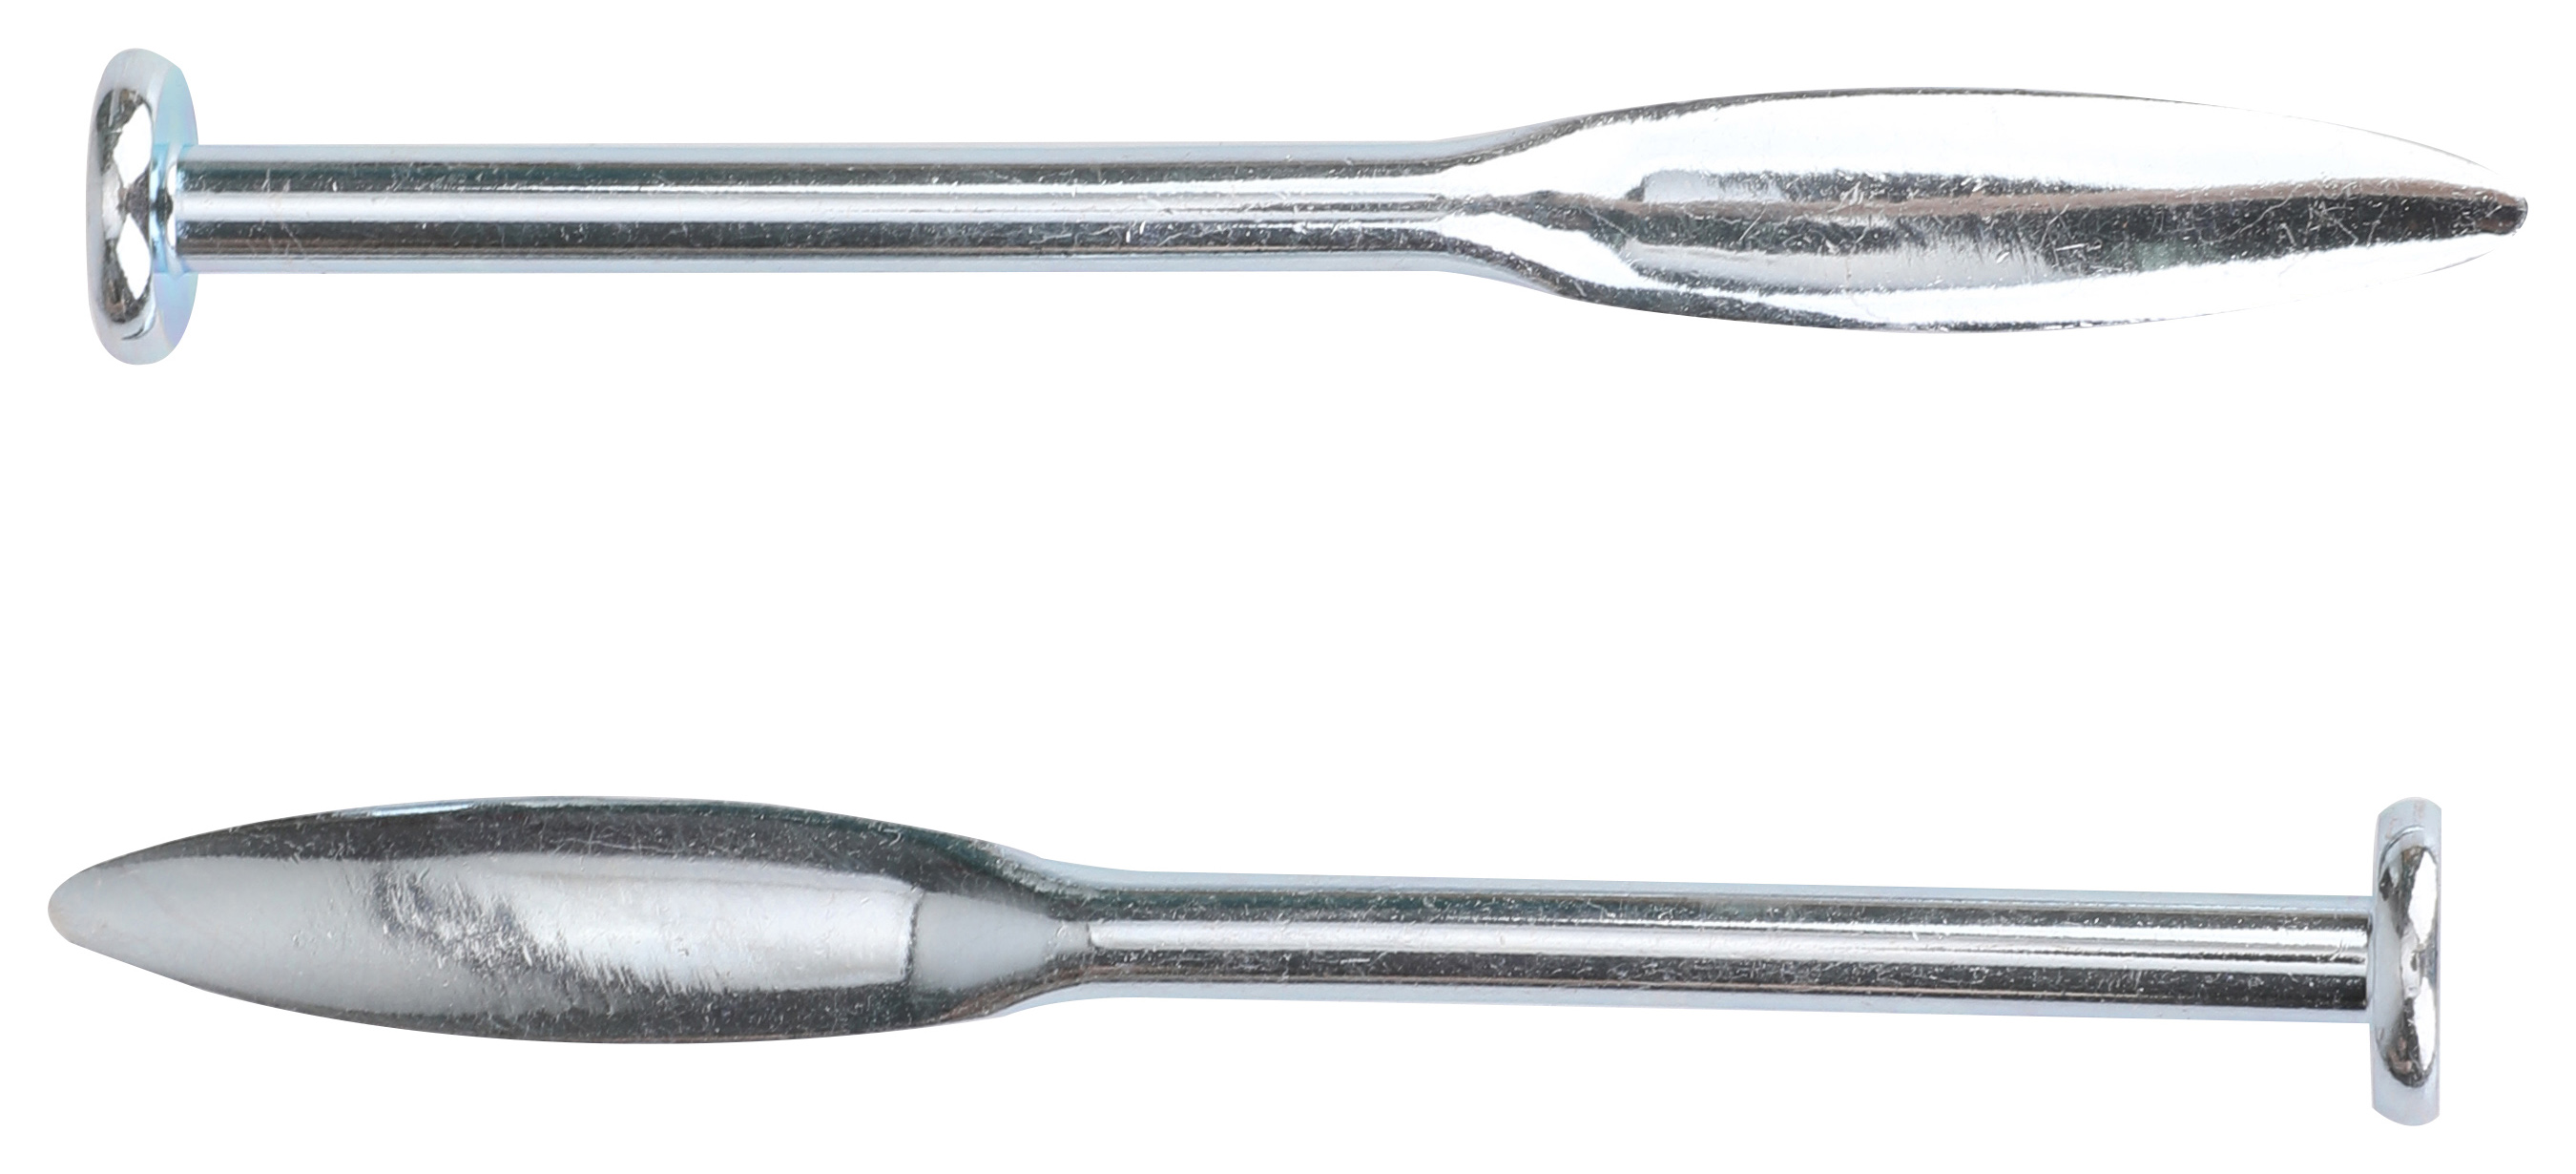 Wickes Drop Forged Brick Line Pins - Pack of 2